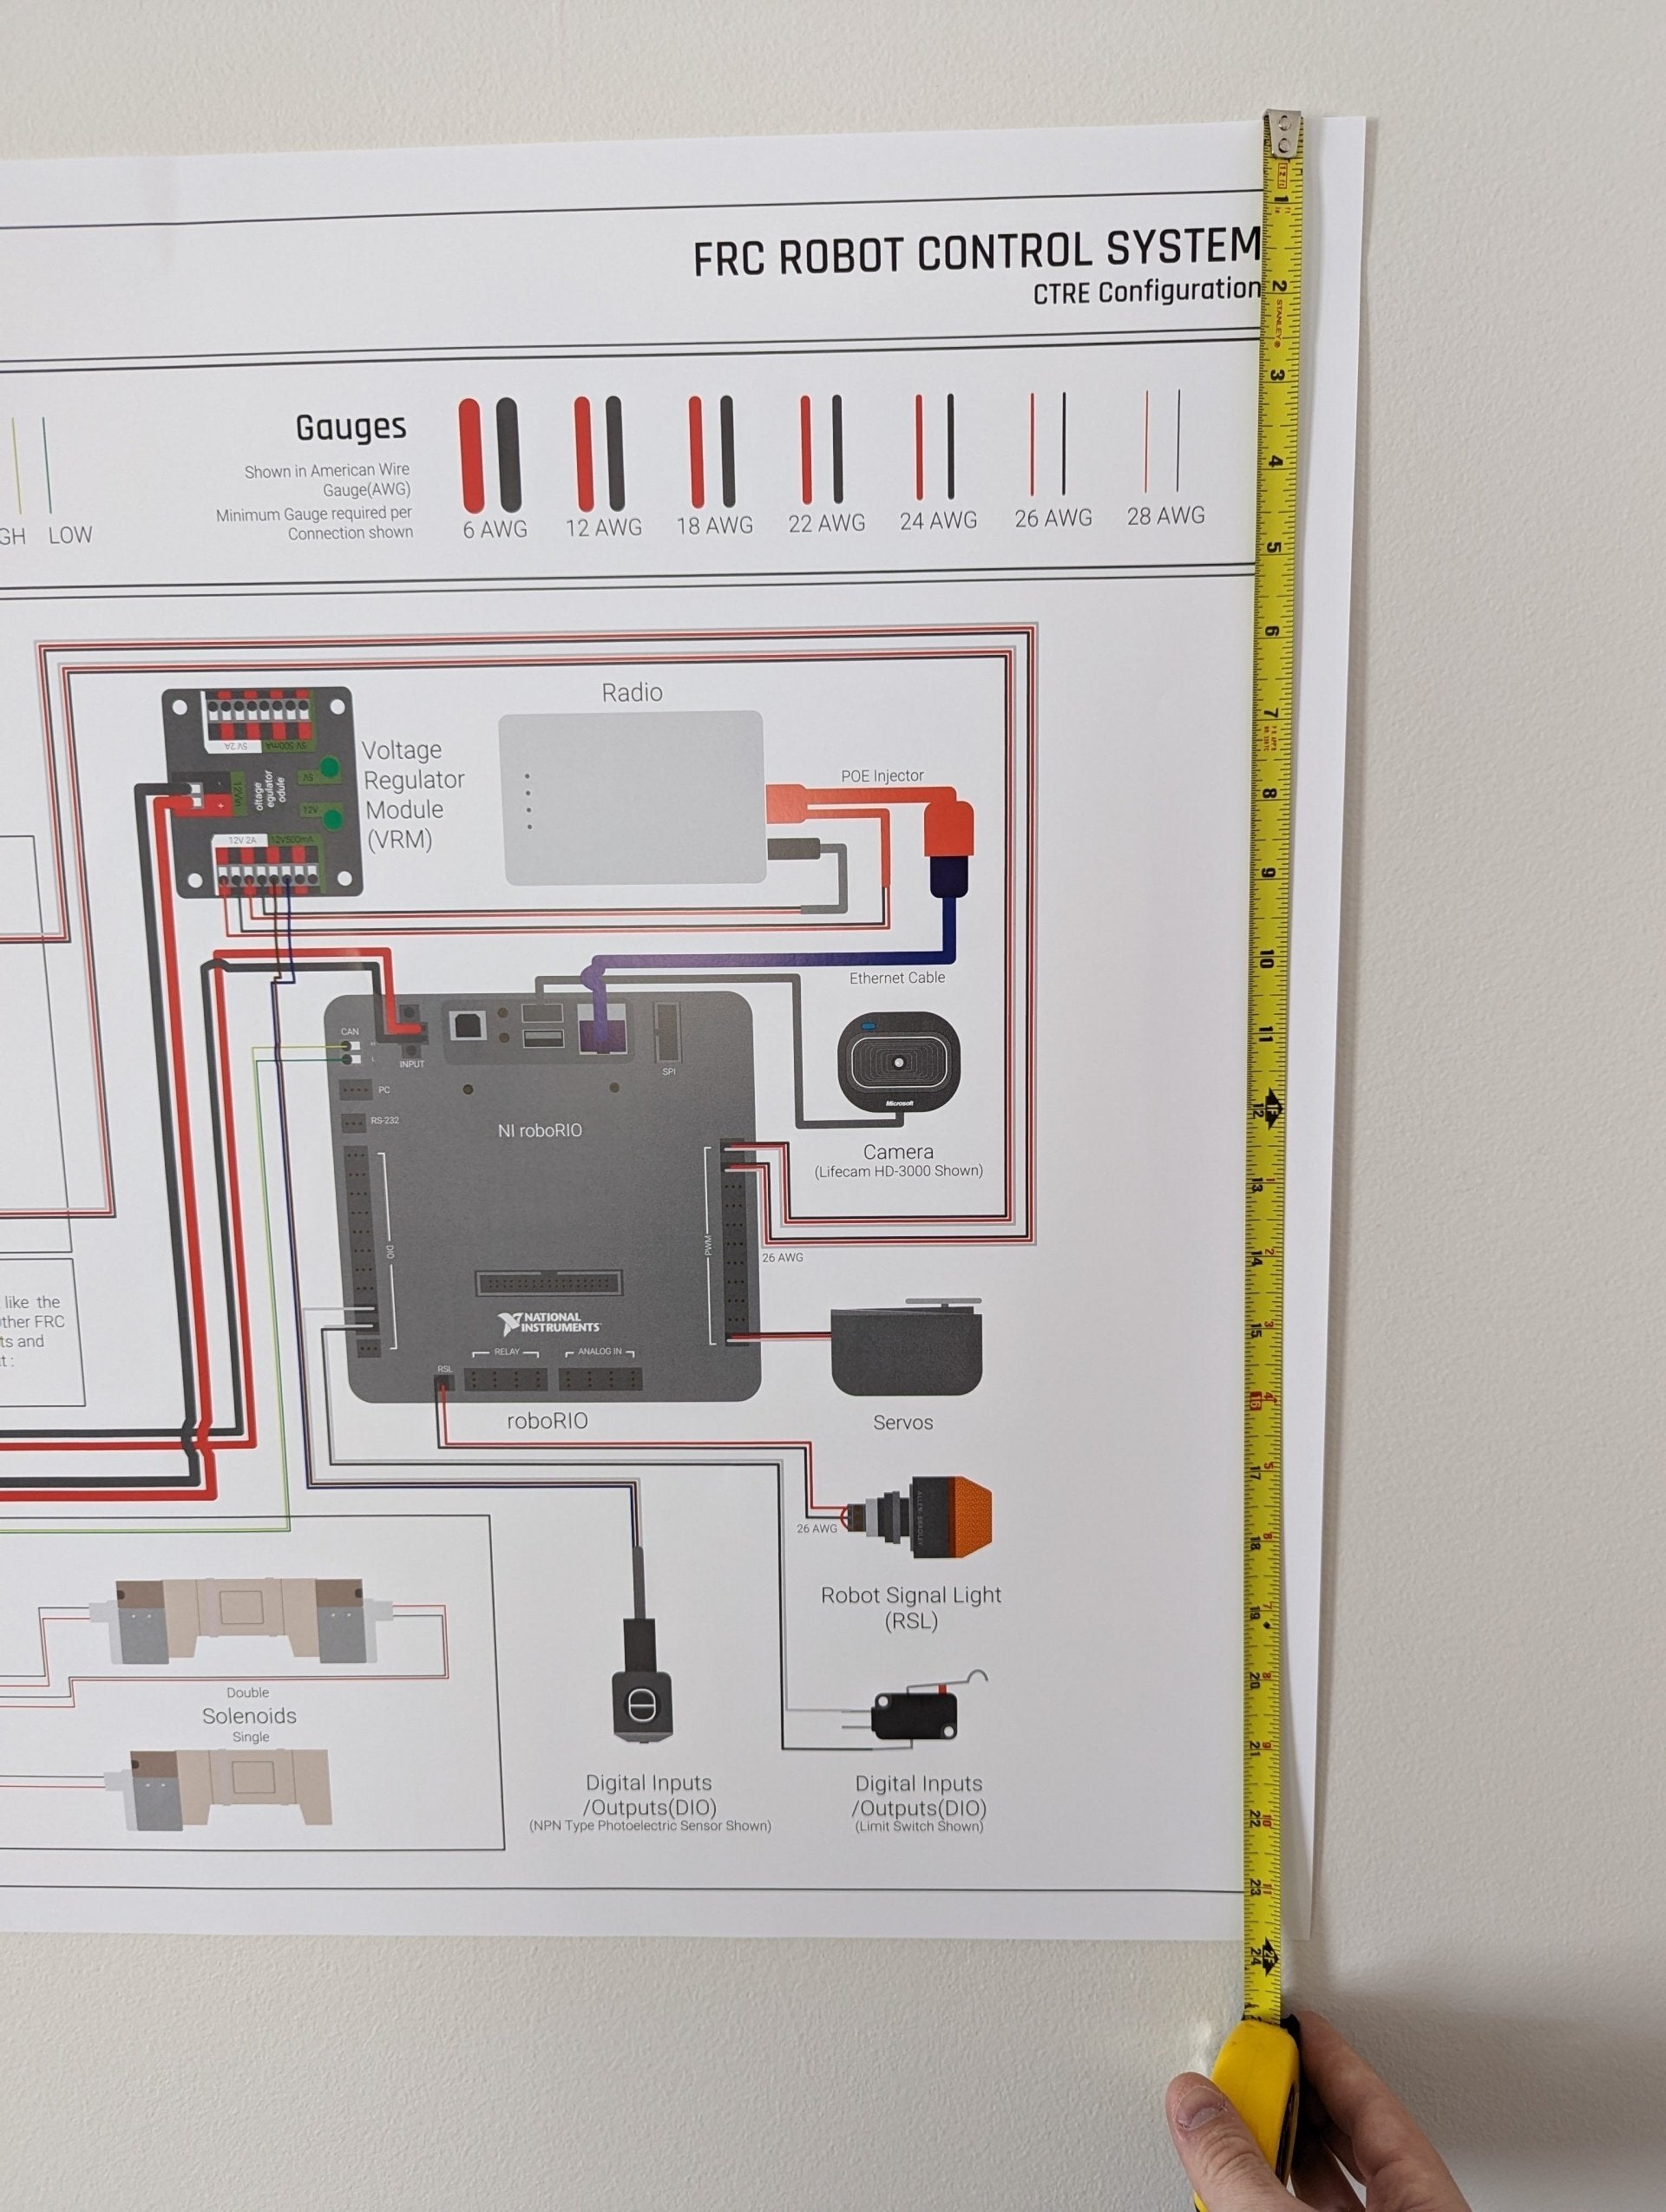 FRC Robot Control System Poster - CTRE Configuration